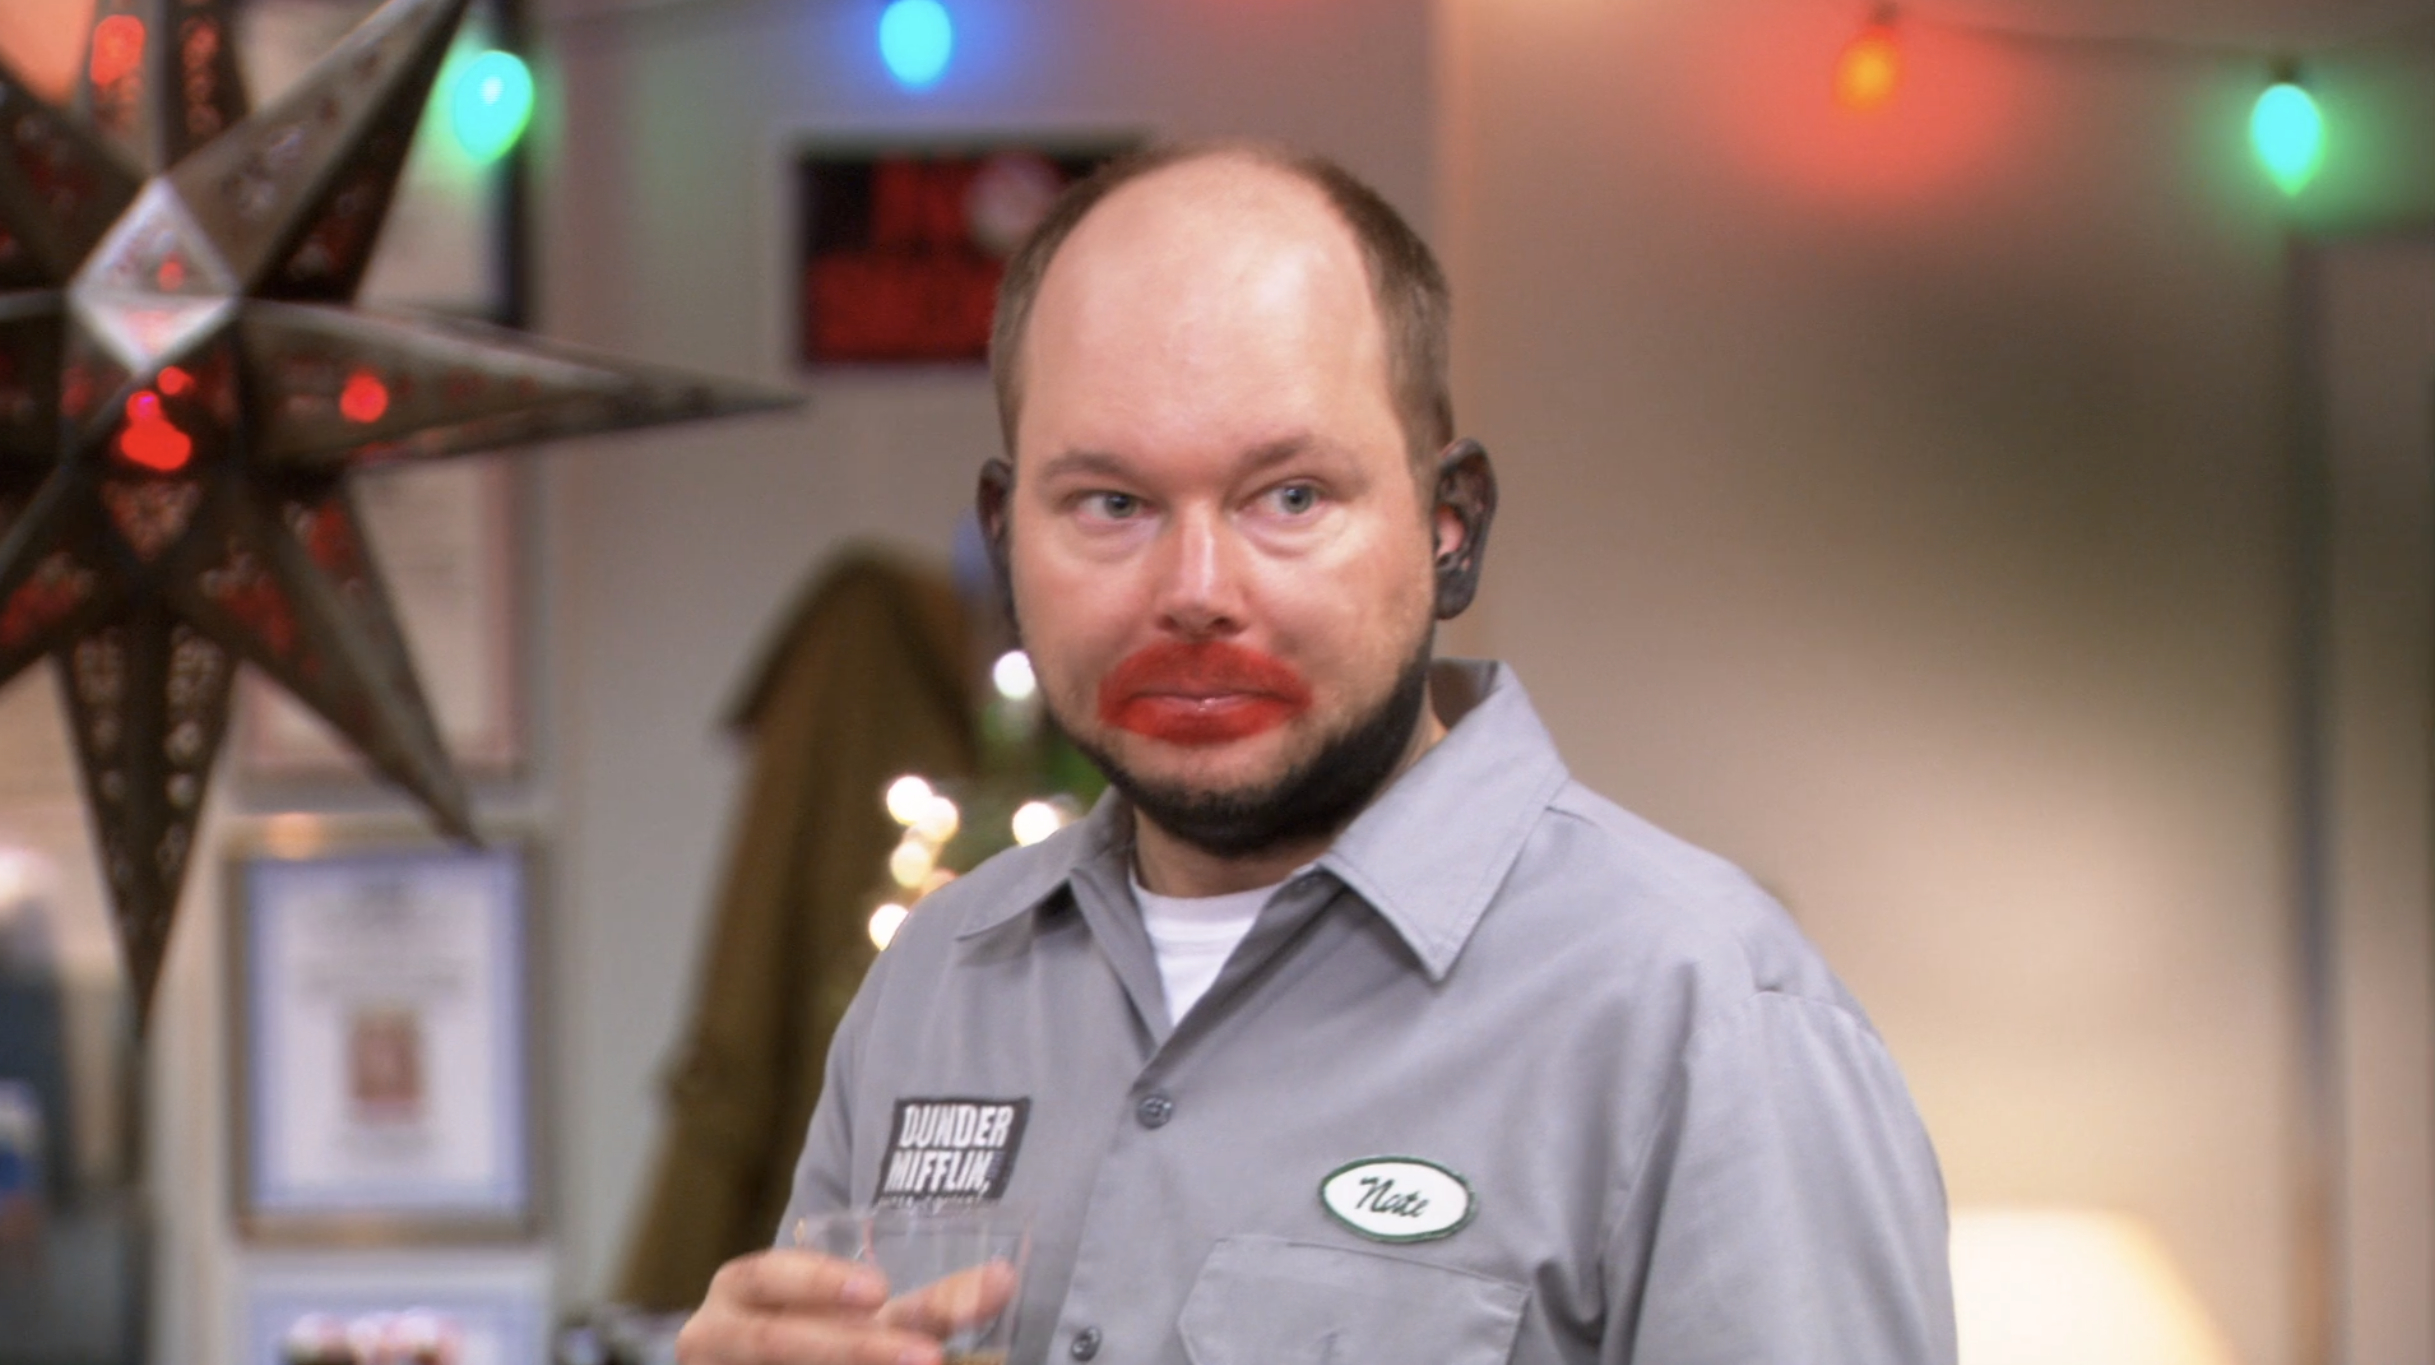 nate with the remnants of blackface makeup on the office